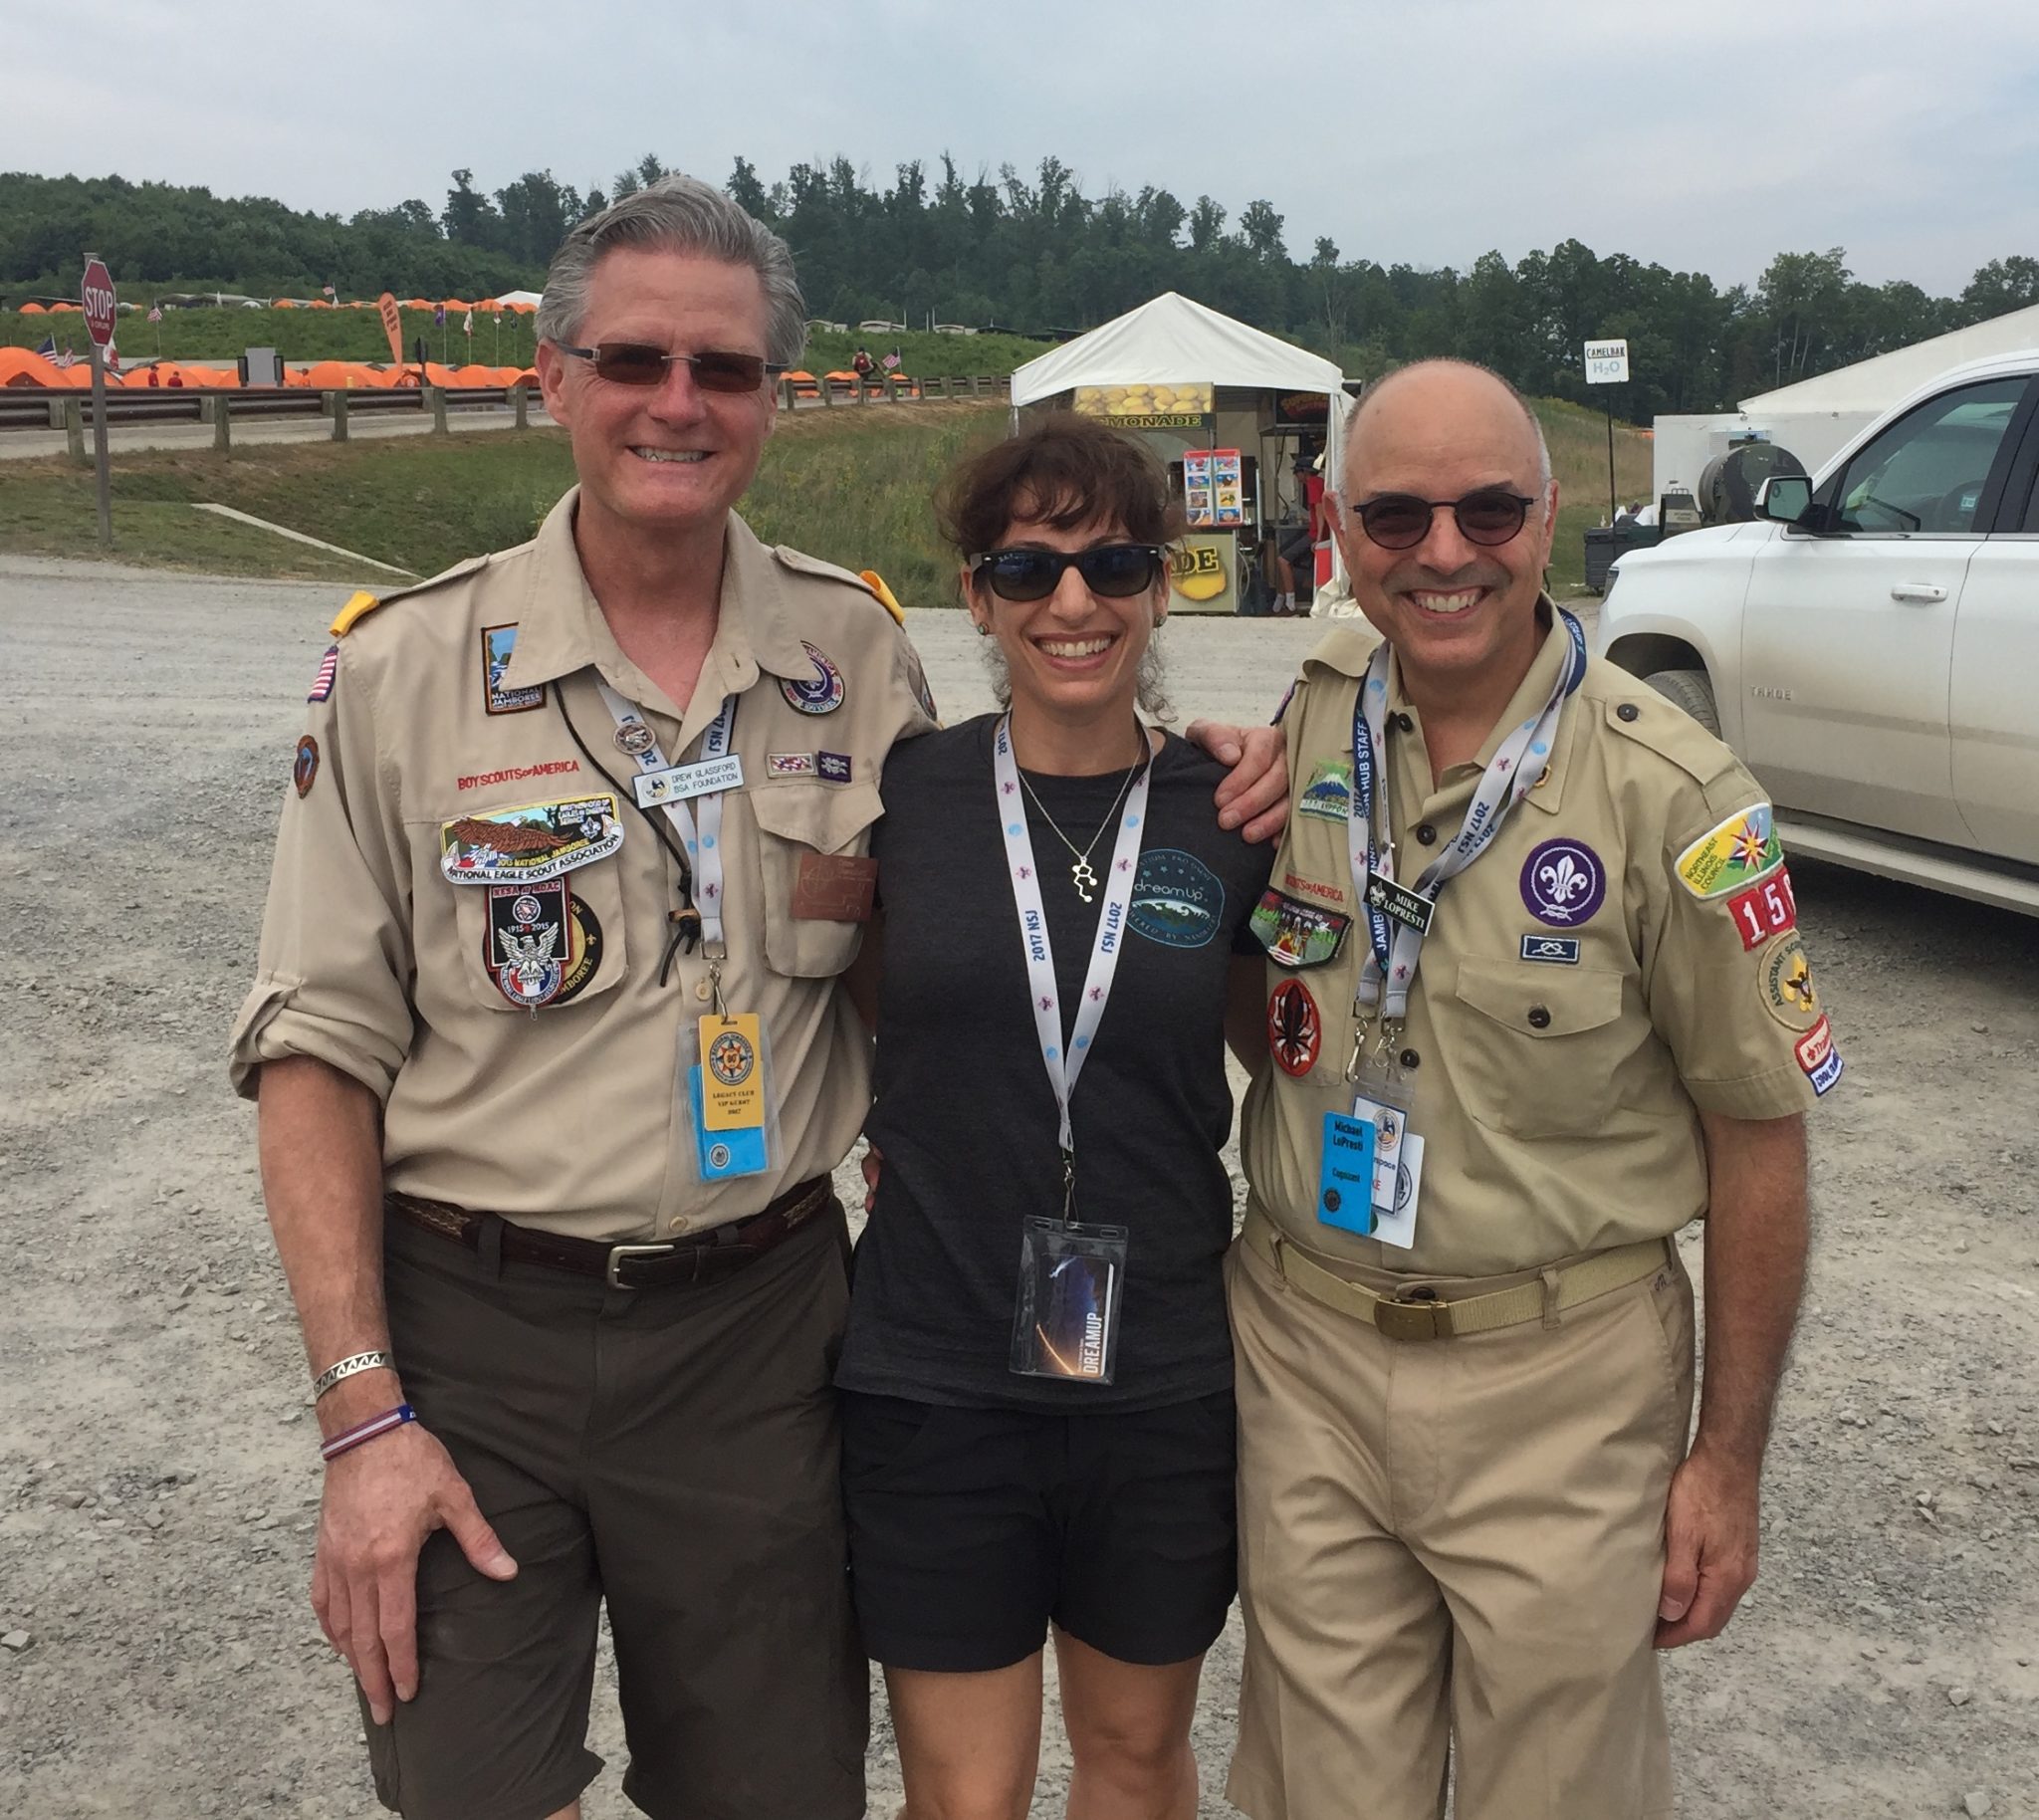 Drew, Carie, and Mike at the Boy Scout Jamboree 2017